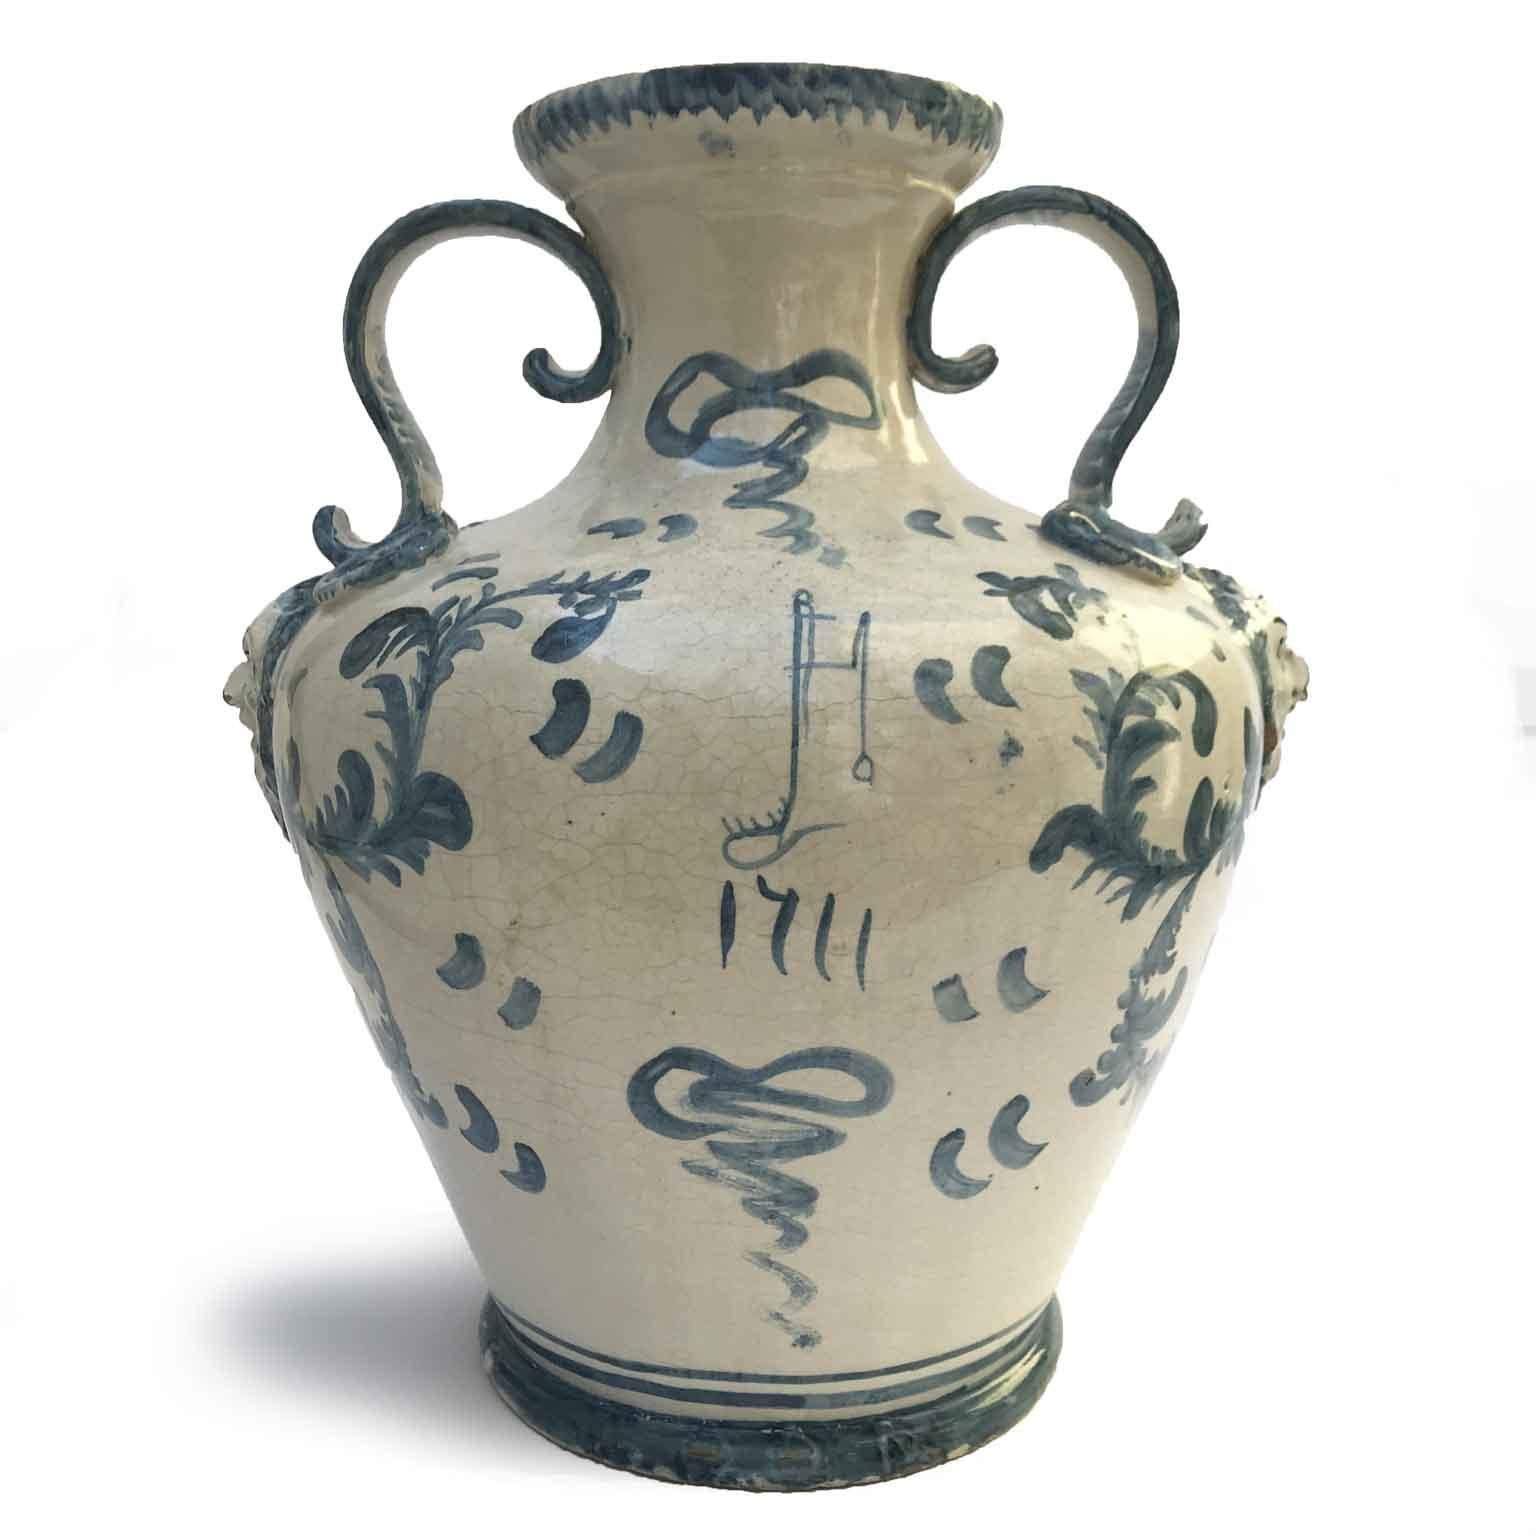 19th Century Italian Savona Maiolica handled Amphora Vase  with masks and Blue Decoration. Unmarked this circular blue and white antique vase is an Italian Ligurian manufacture from Savona. Good age related condition, minor defects.
Mid 19th century